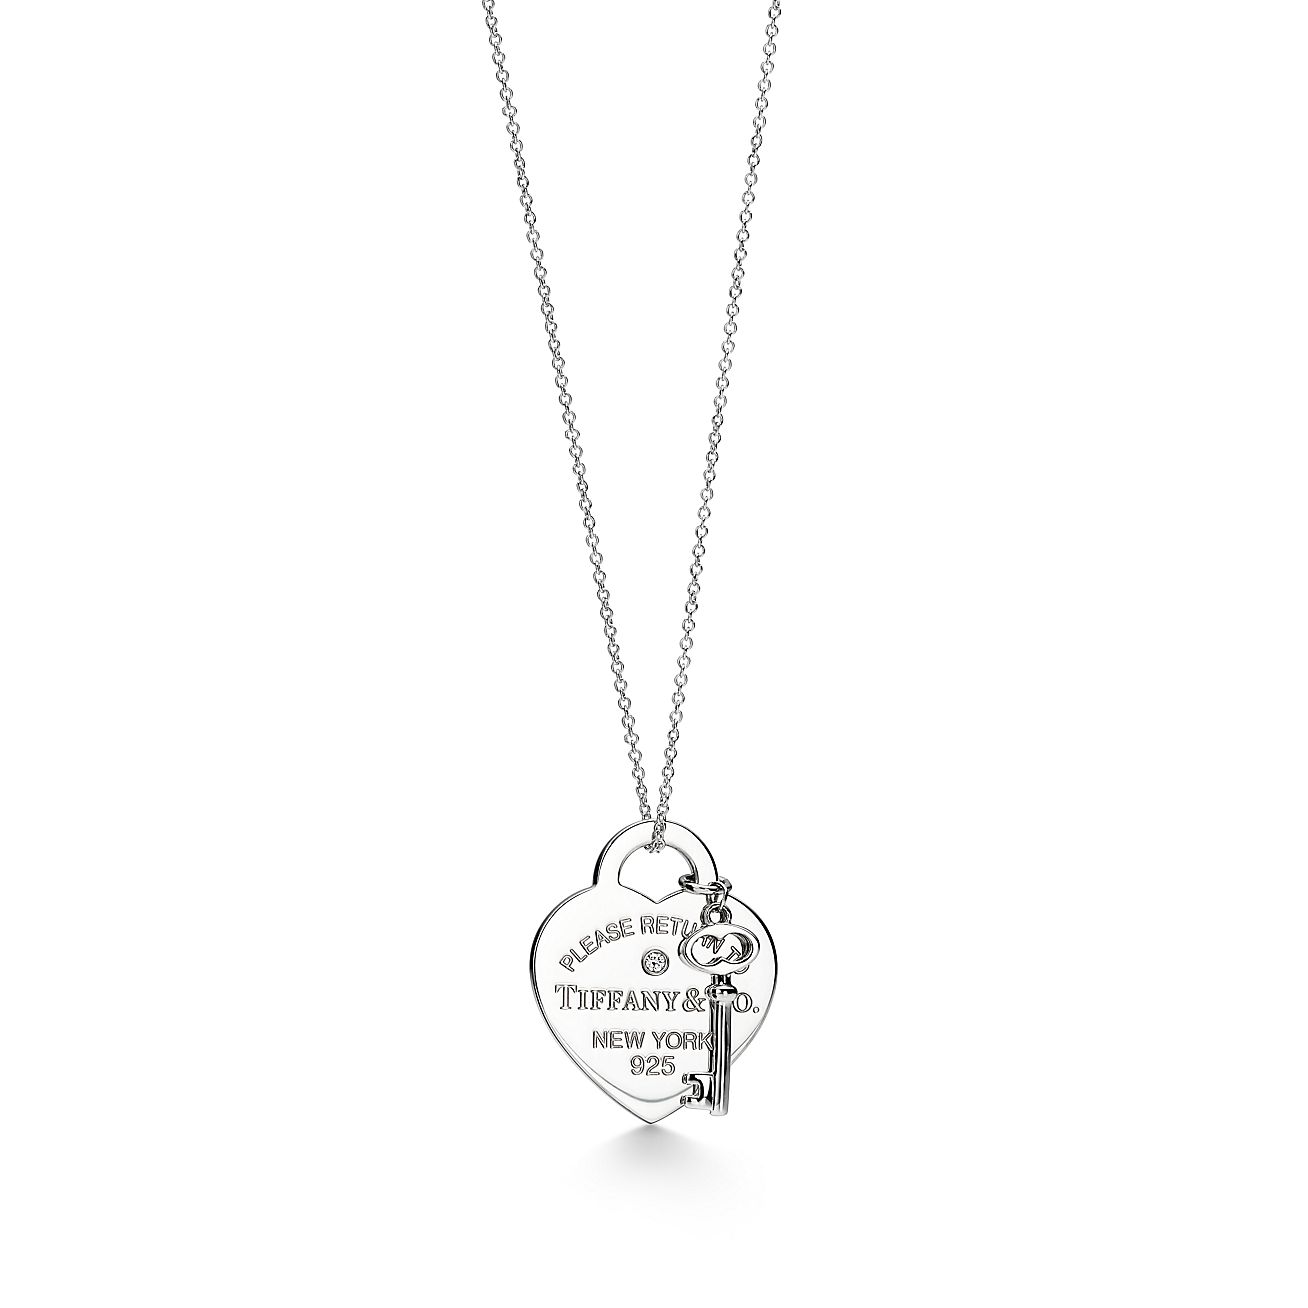 Return to Tiffany™ Heart Tag and Key Necklace in Silver with a